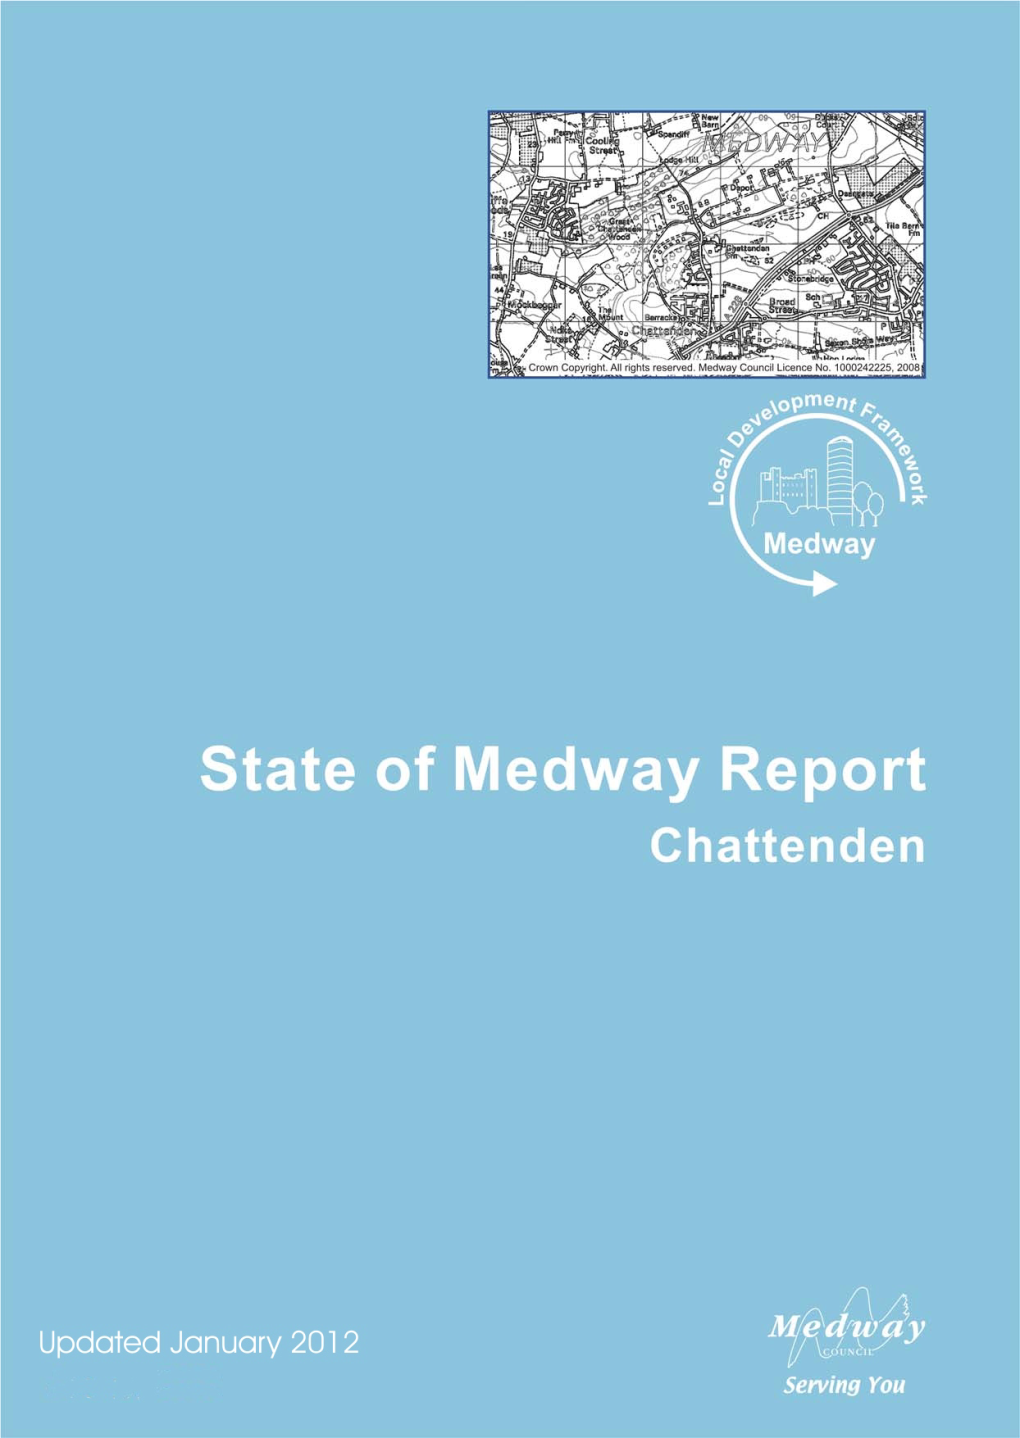 Chattenden) Is a Strategic Issue for Medway